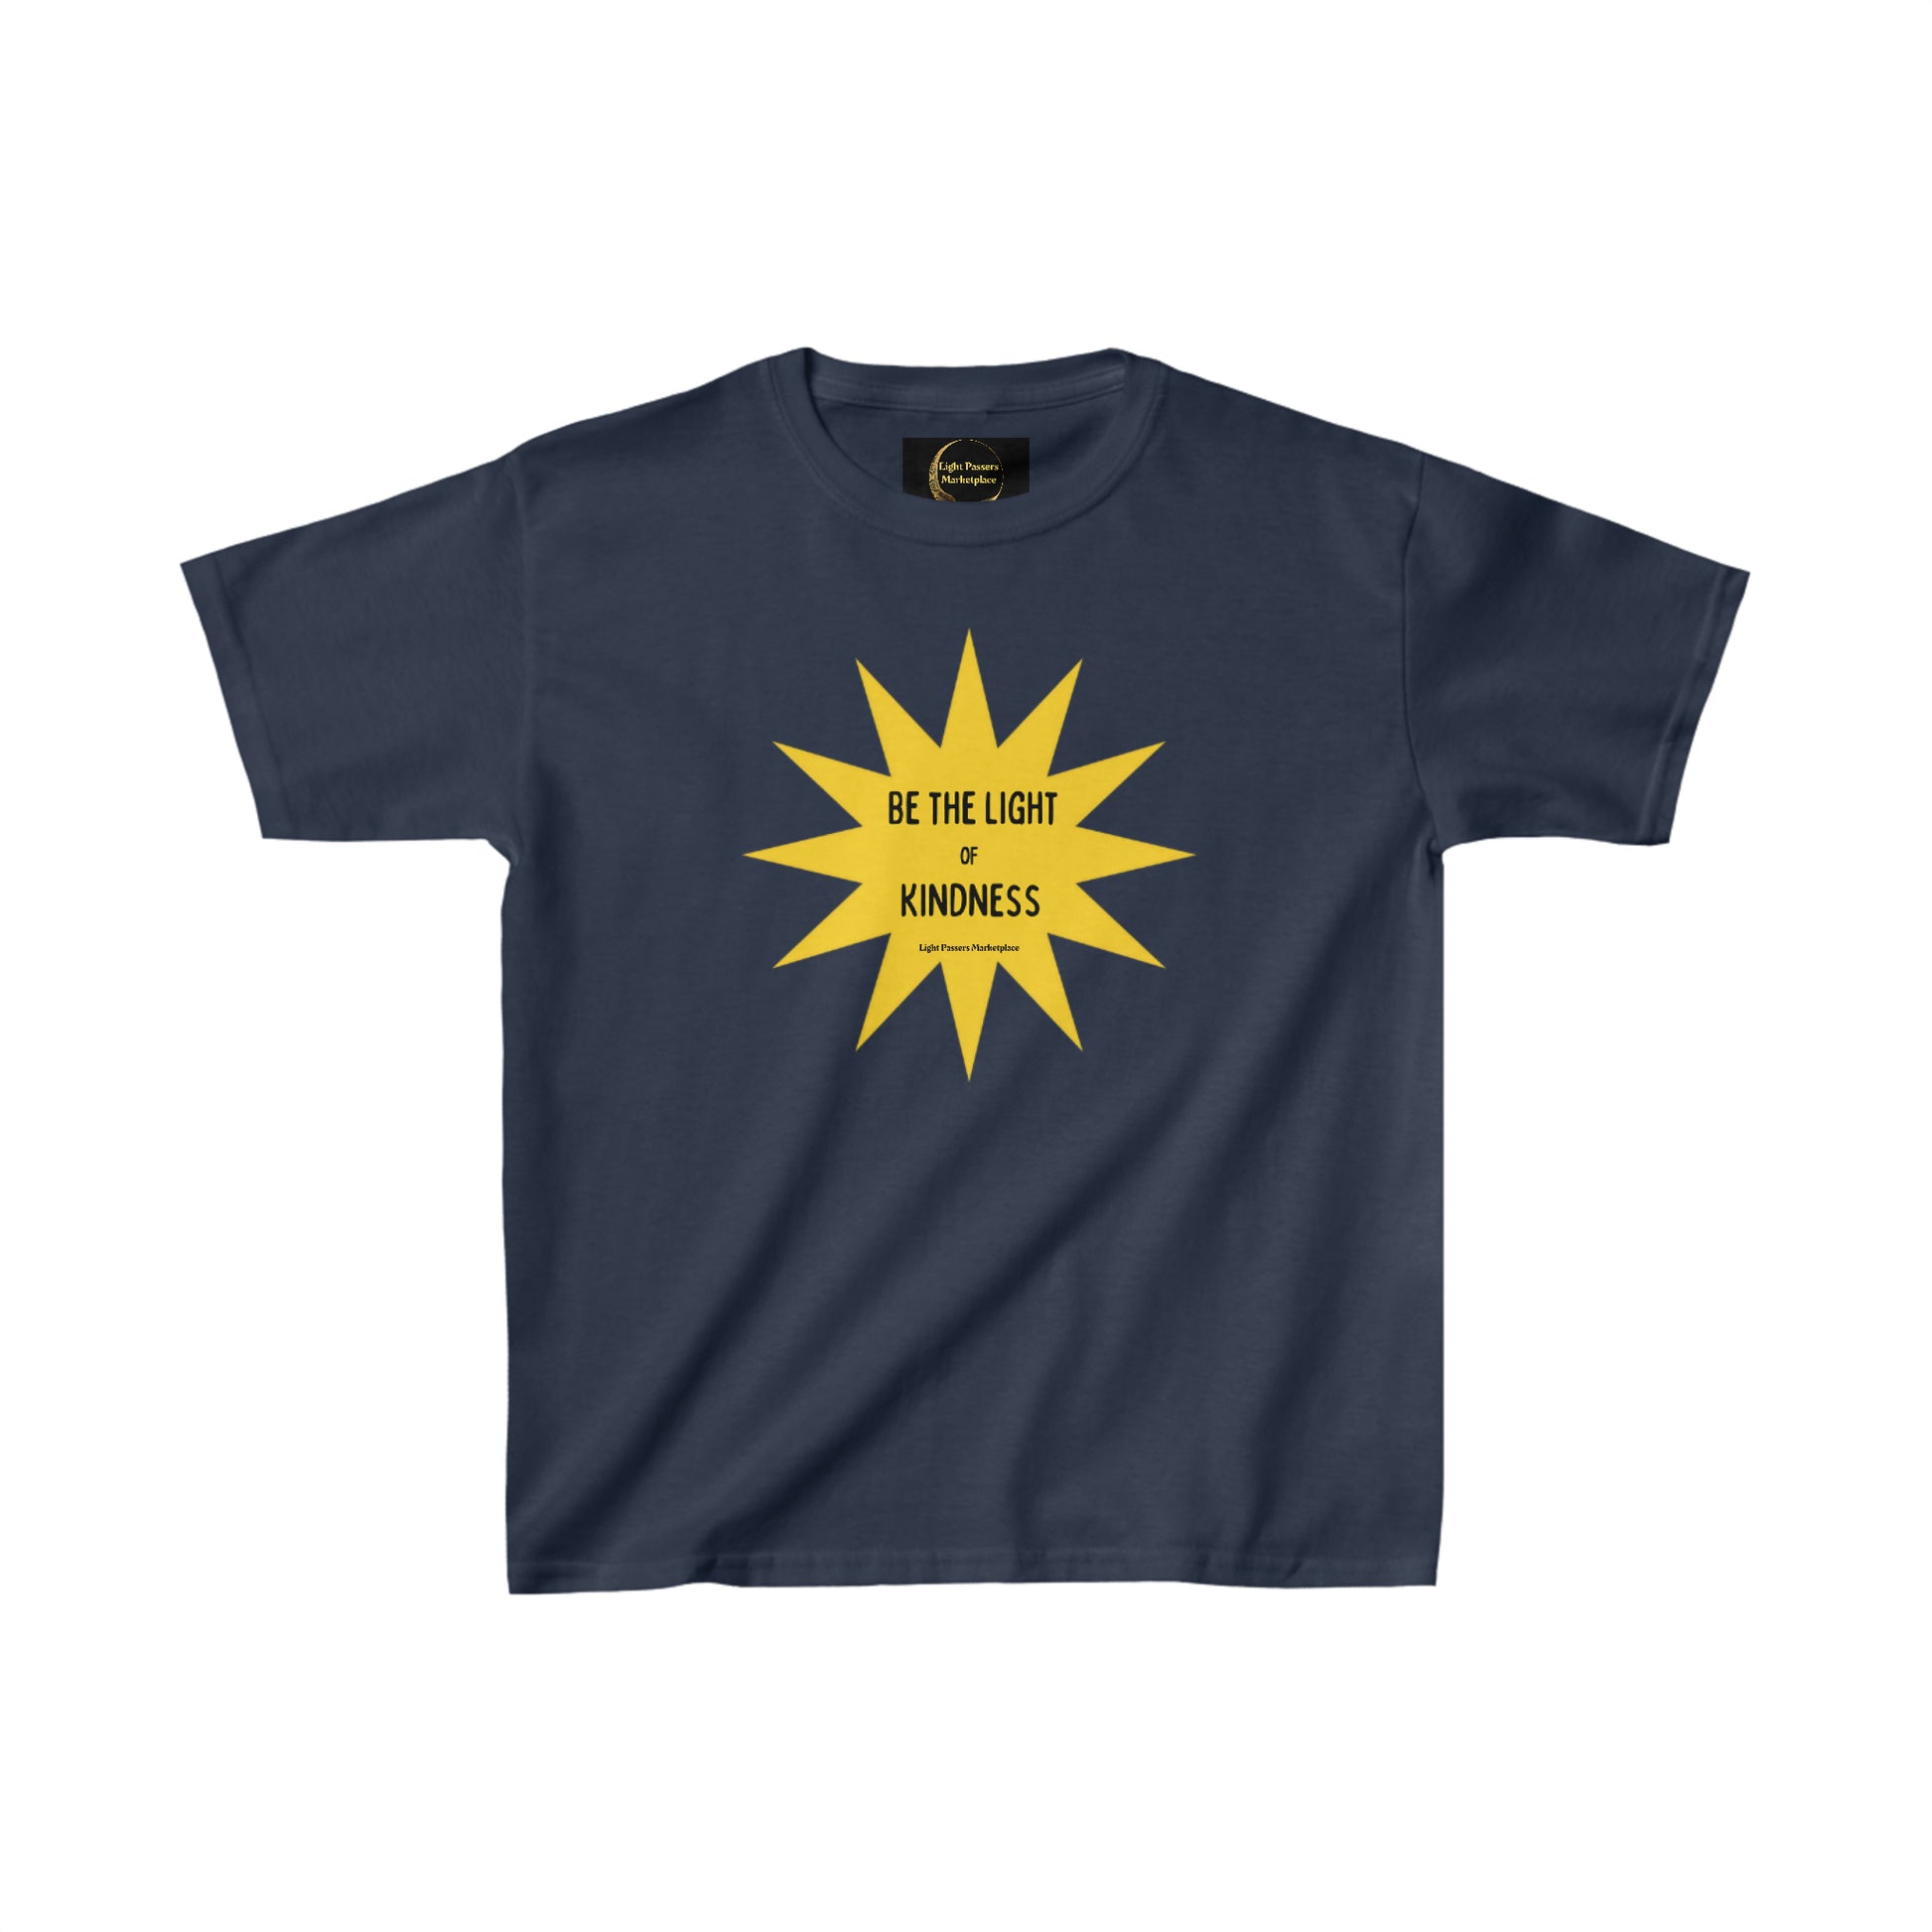 Youth cotton t-shirt featuring a yellow star and black text design. Made of 100% cotton with twill tape shoulders for durability and tear-away label. Classic fit, midweight fabric.